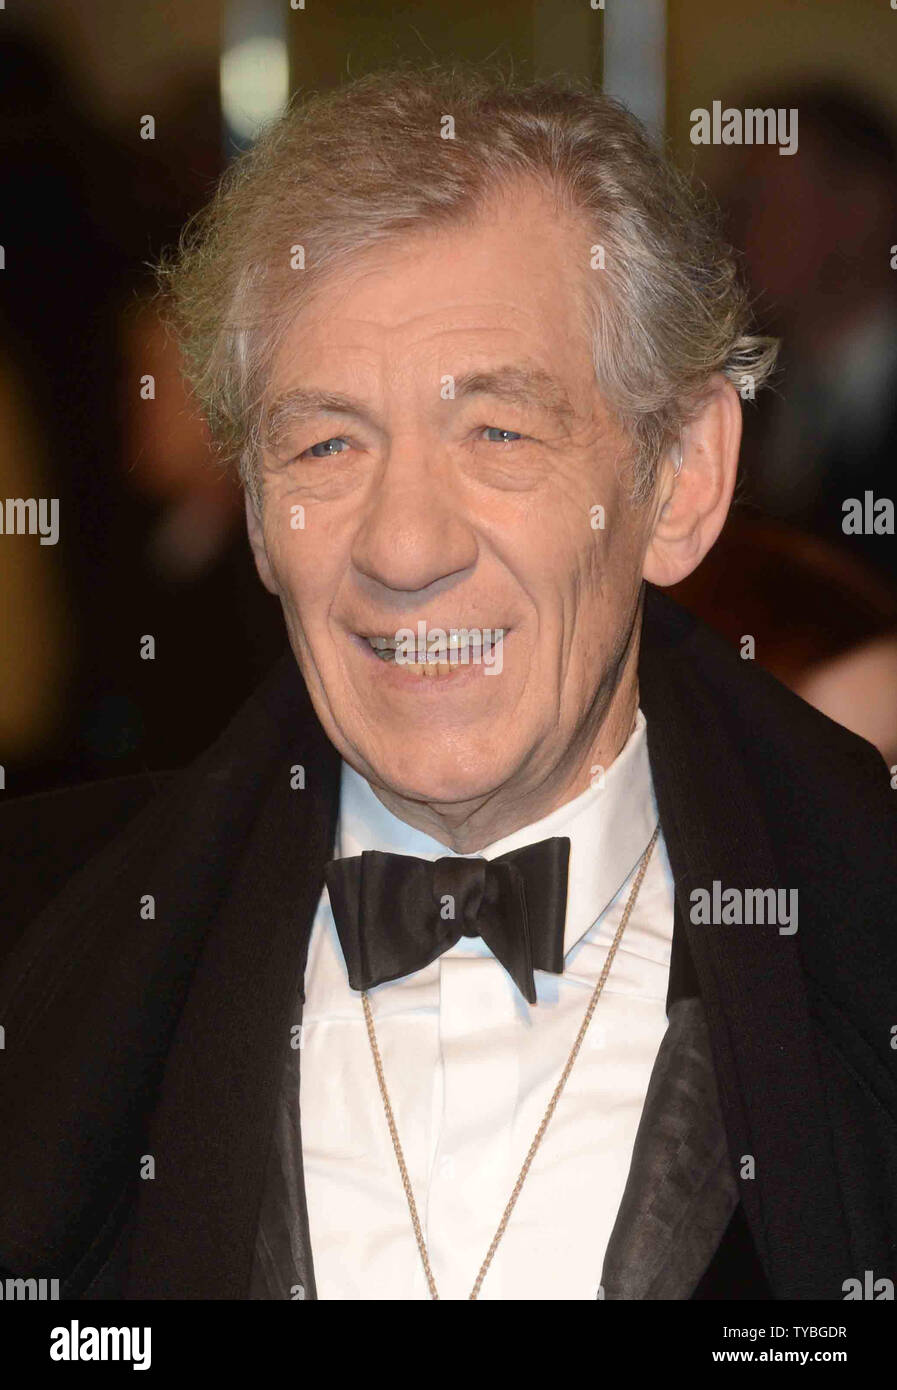 English actor Sir Ian McKellen attends The UK premiere of 'The Hobbit: An Unexpected Journey' at The Odeon Leicester Square and Empire Leicester Square, in London on December 12, 2012.     UPI/Paul Treadway Stock Photo